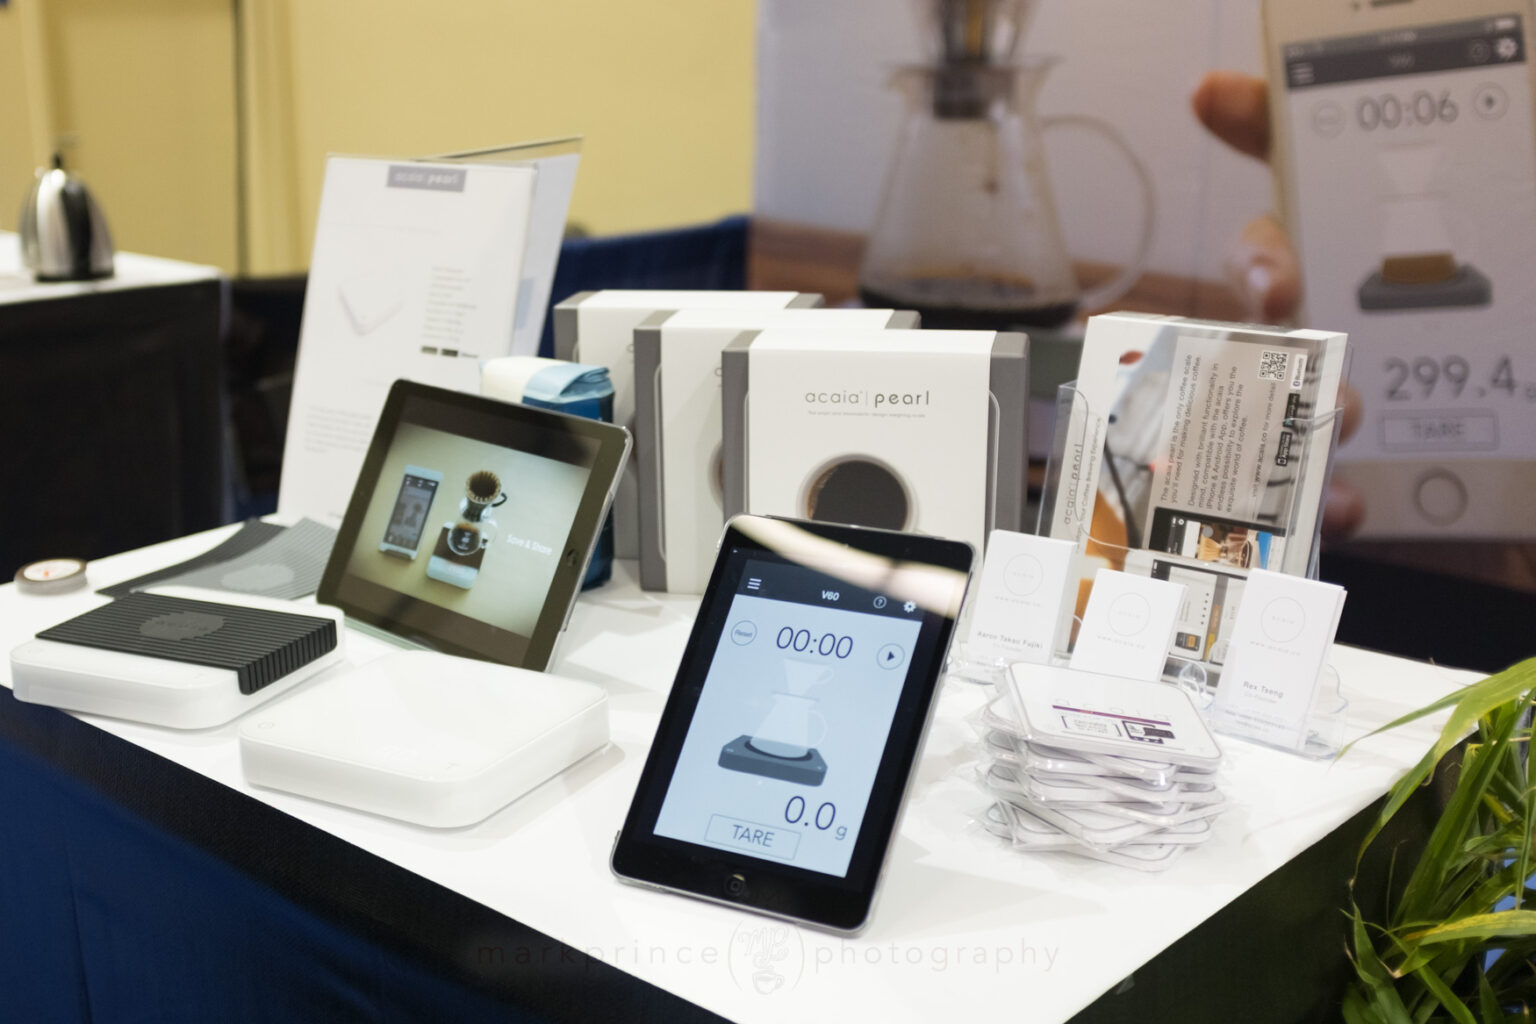 The booth at the SCAA 2014 Trade Show in Seattle was full of tablets and demonstrations of the Acaia Pearl's connectivity.